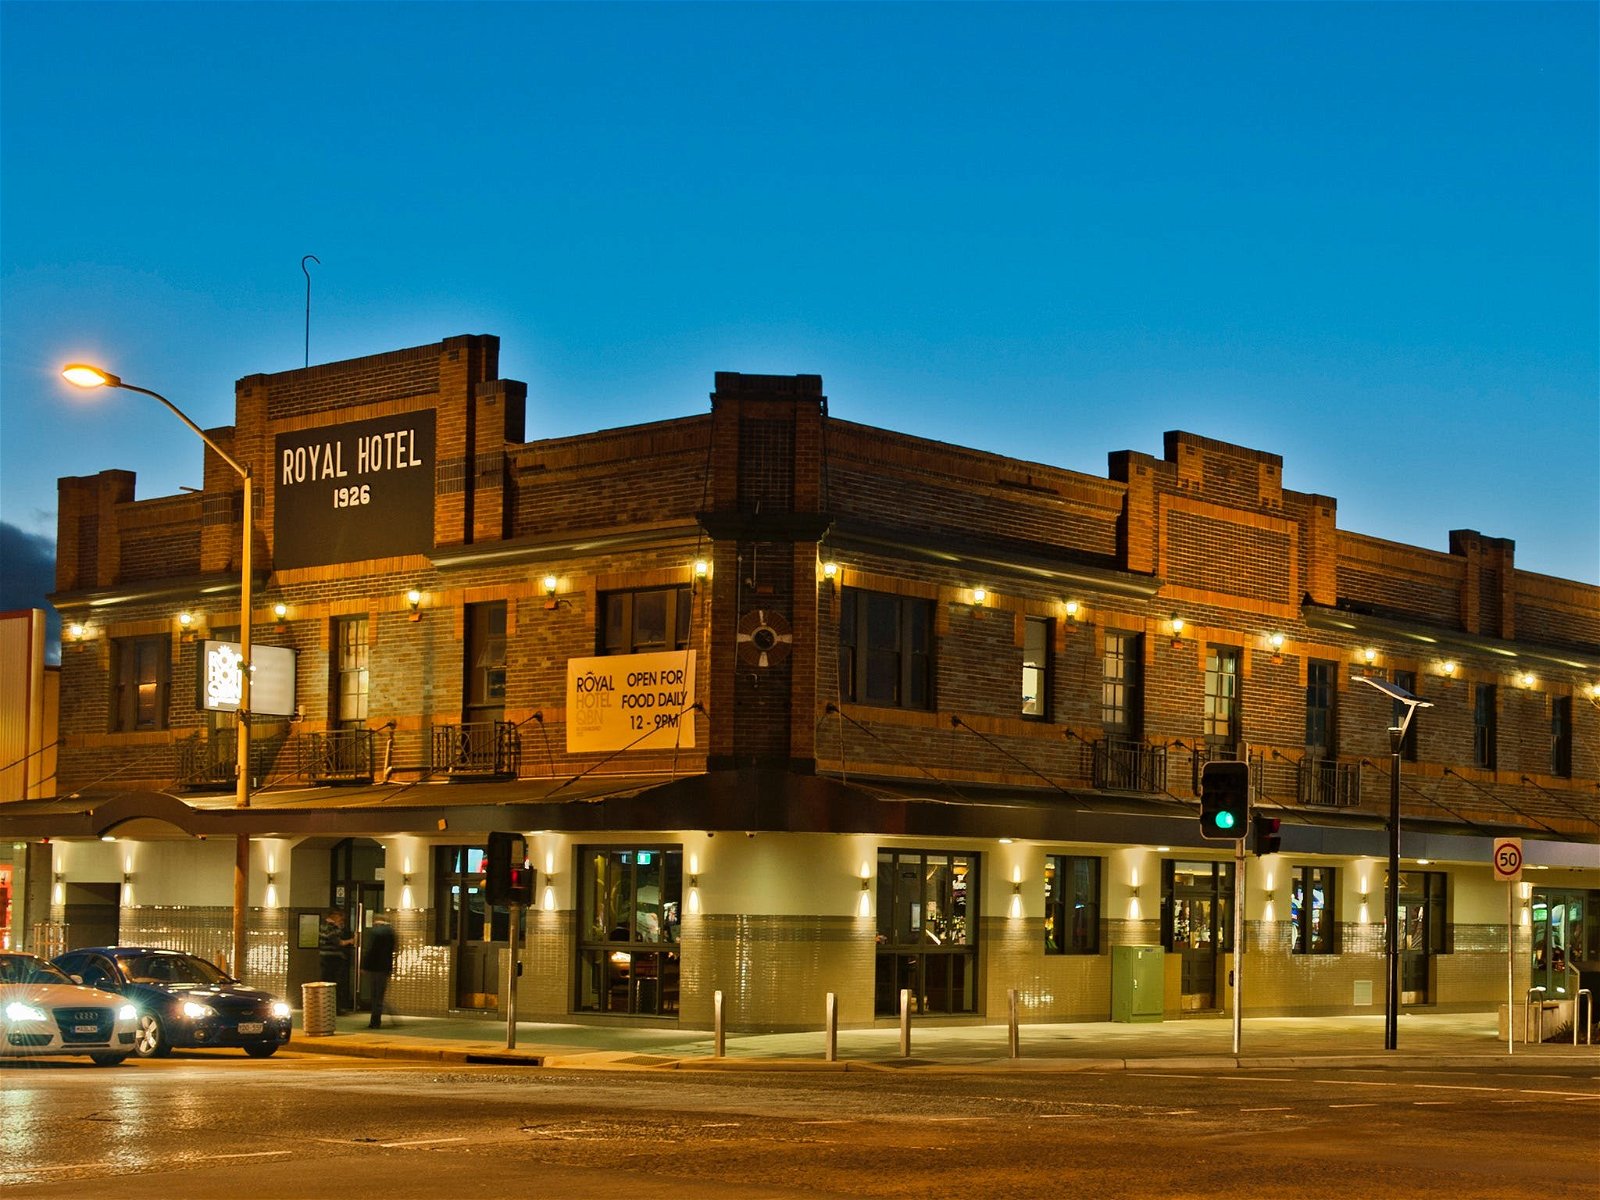 Royal Hotel Queanbeyan - Northern Rivers Accommodation